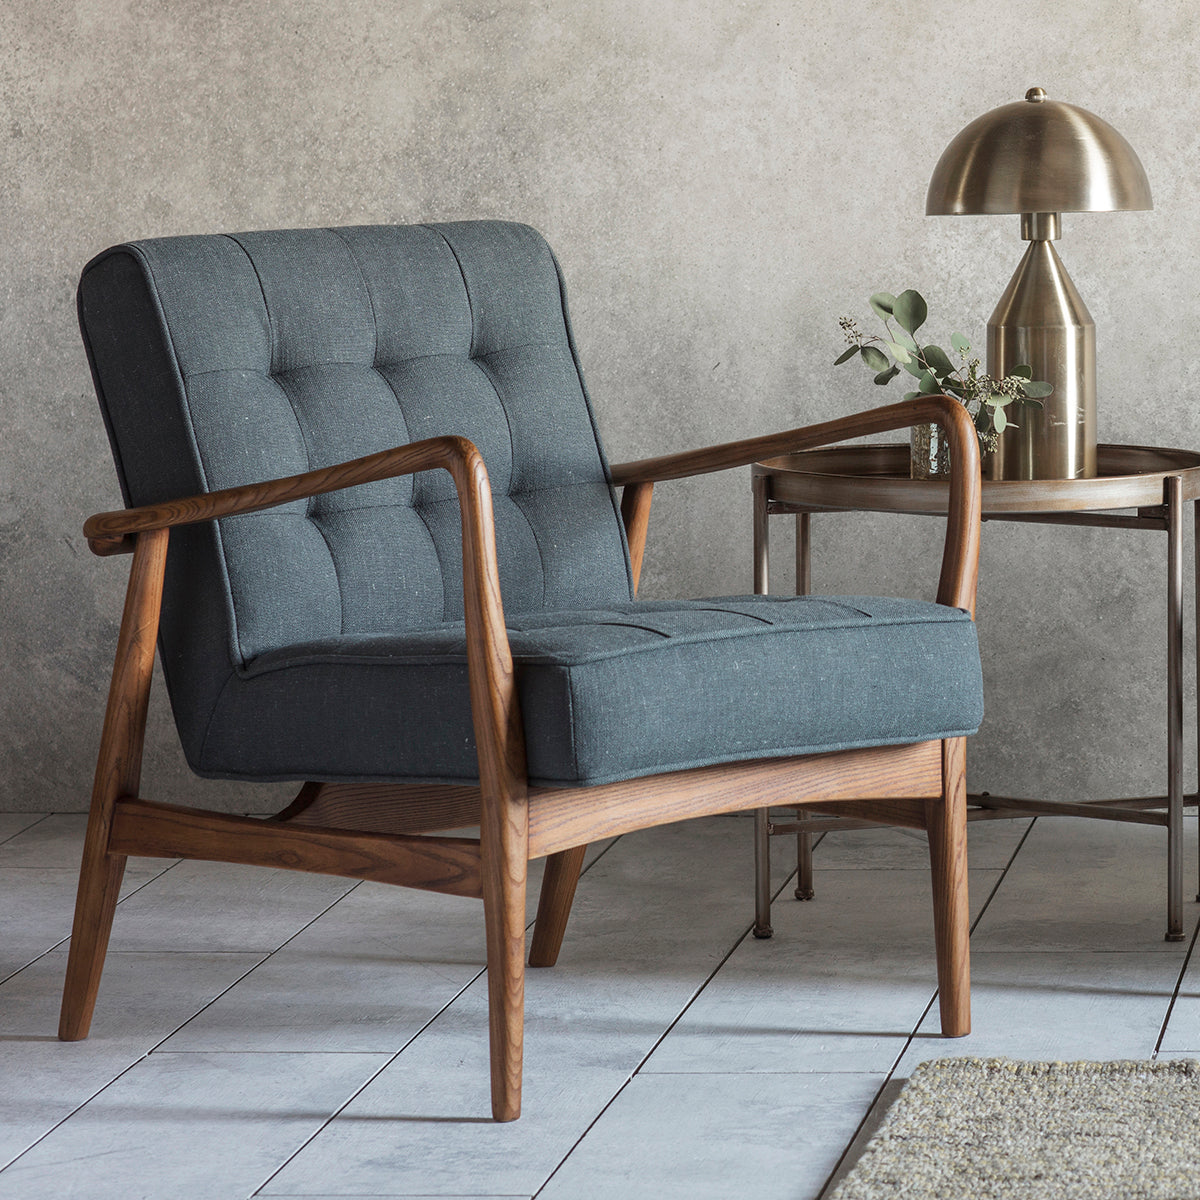 A Dark Grey Linen Camber Armchair with wooden legs and a lamp on a table, perfect for interior decor.